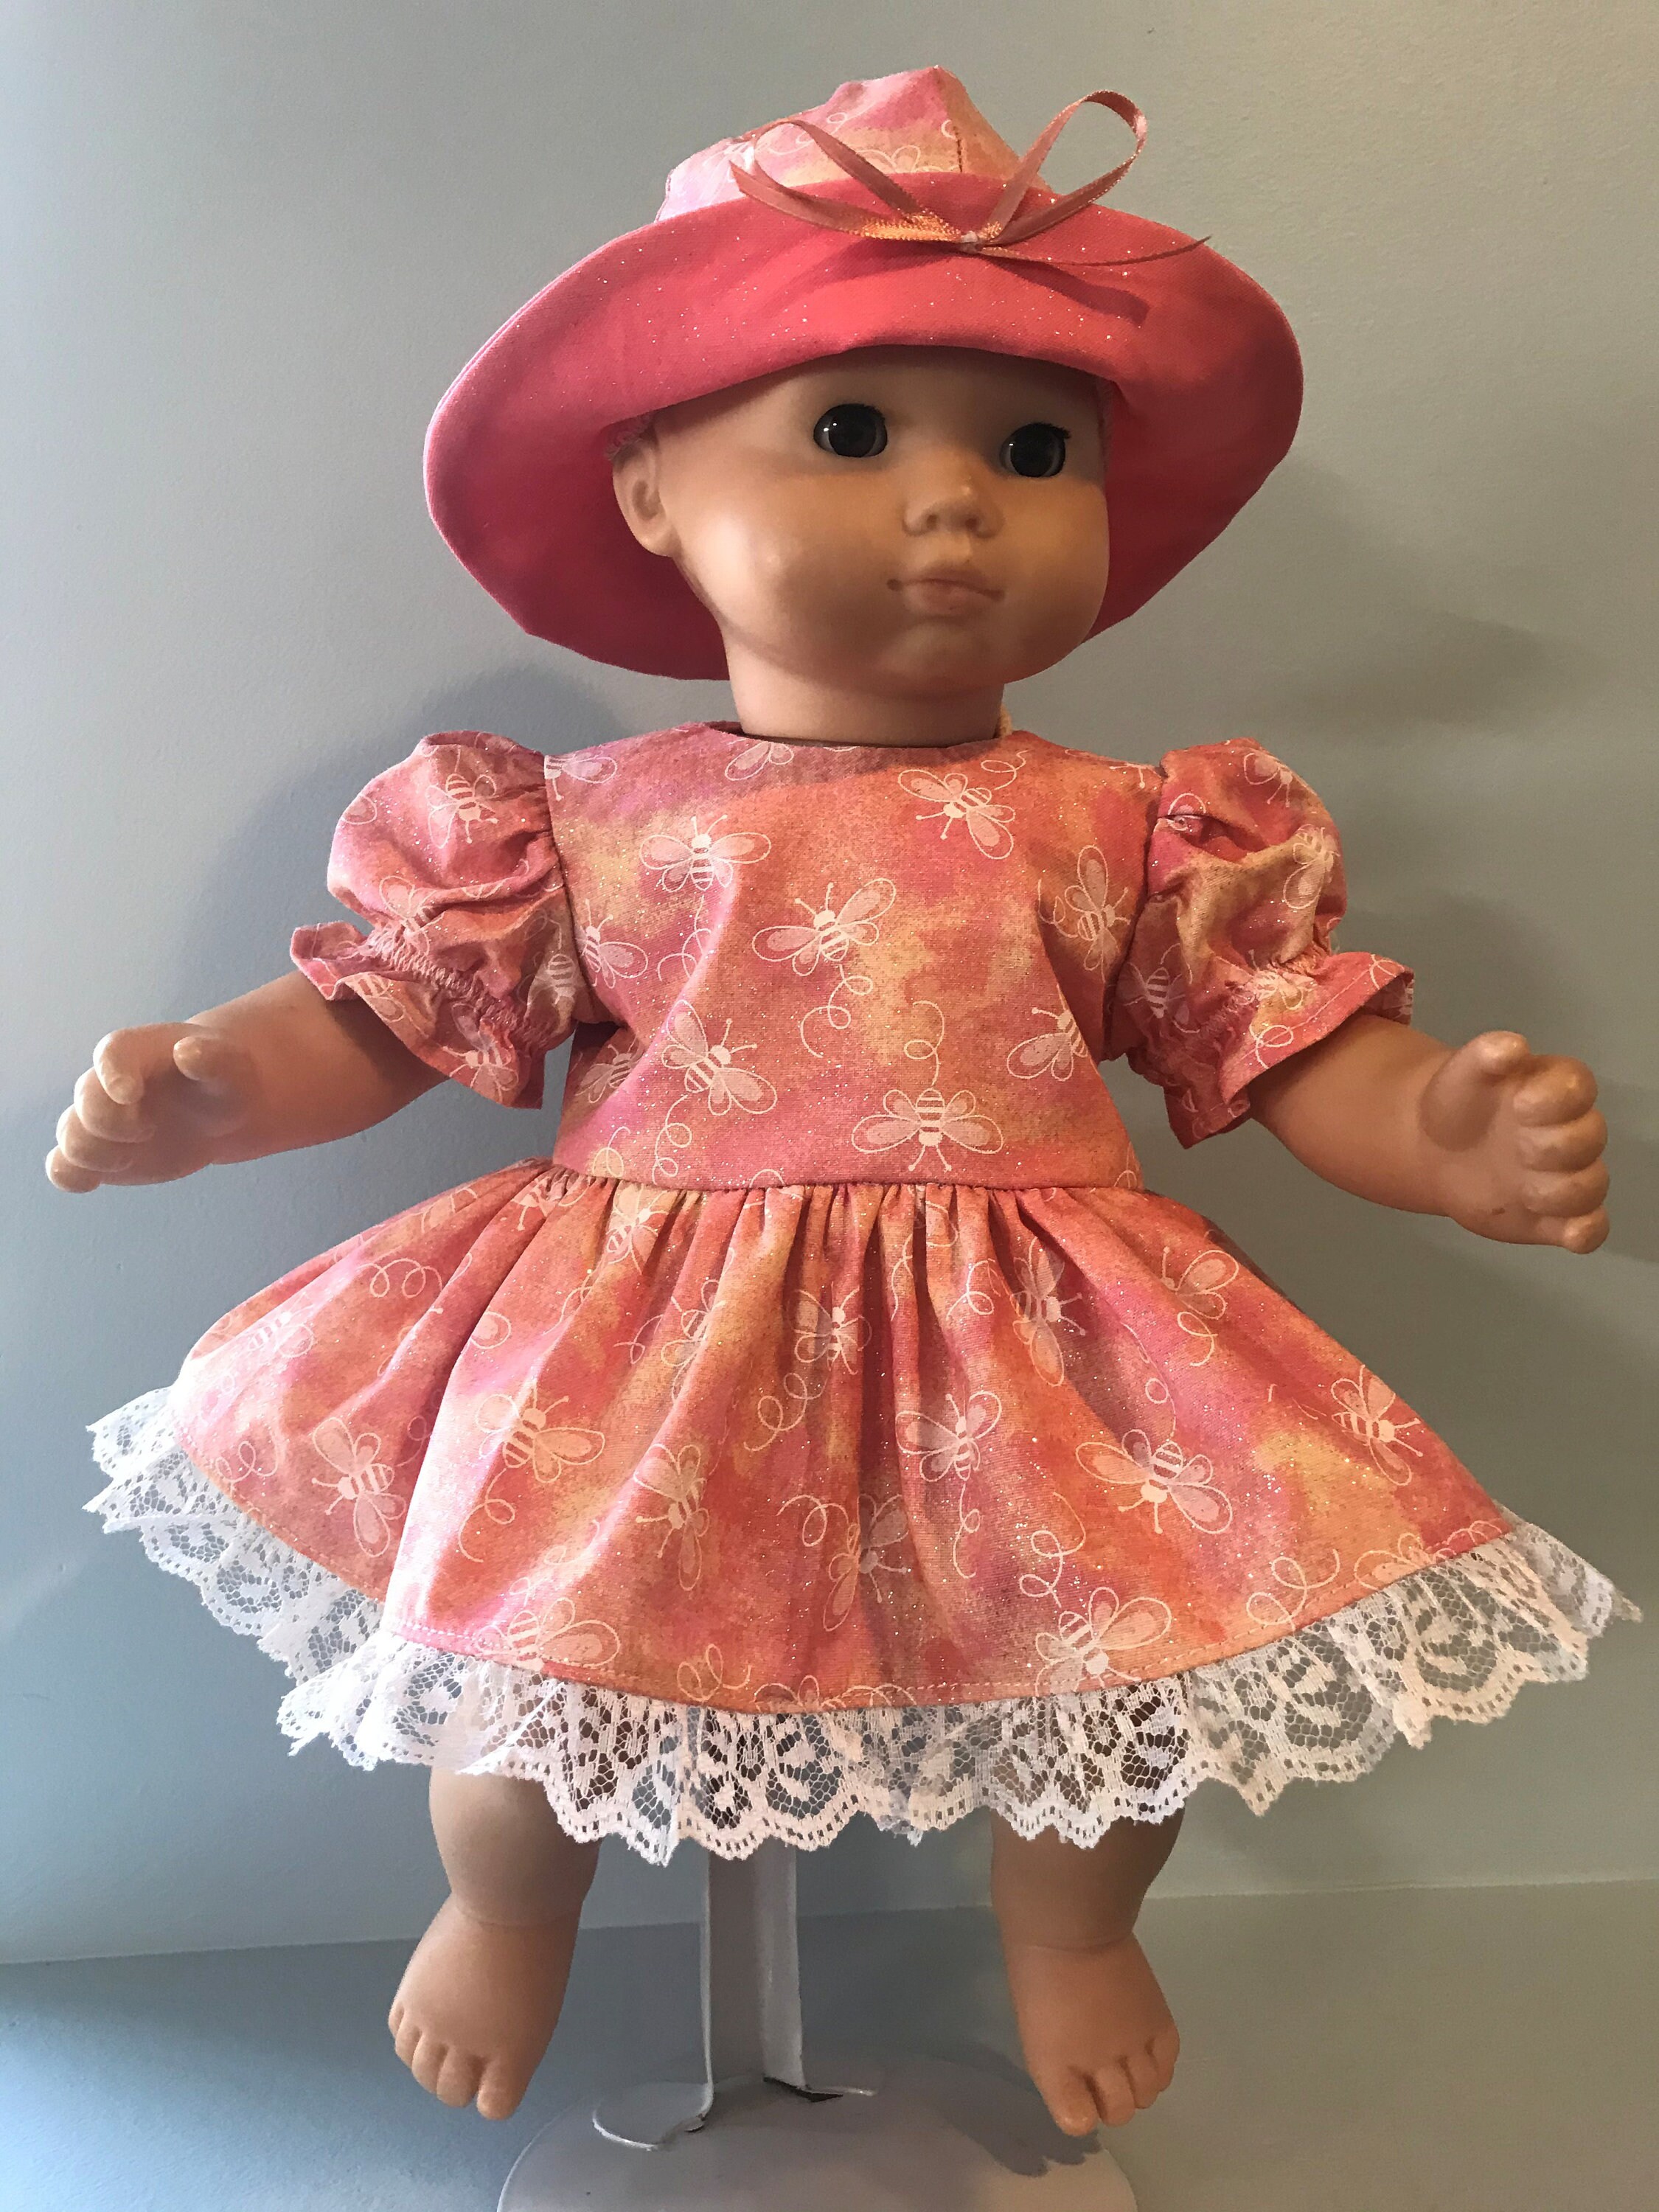 Red Polka Dot Doll Outfit for the American Girl 15 Bitty Baby 